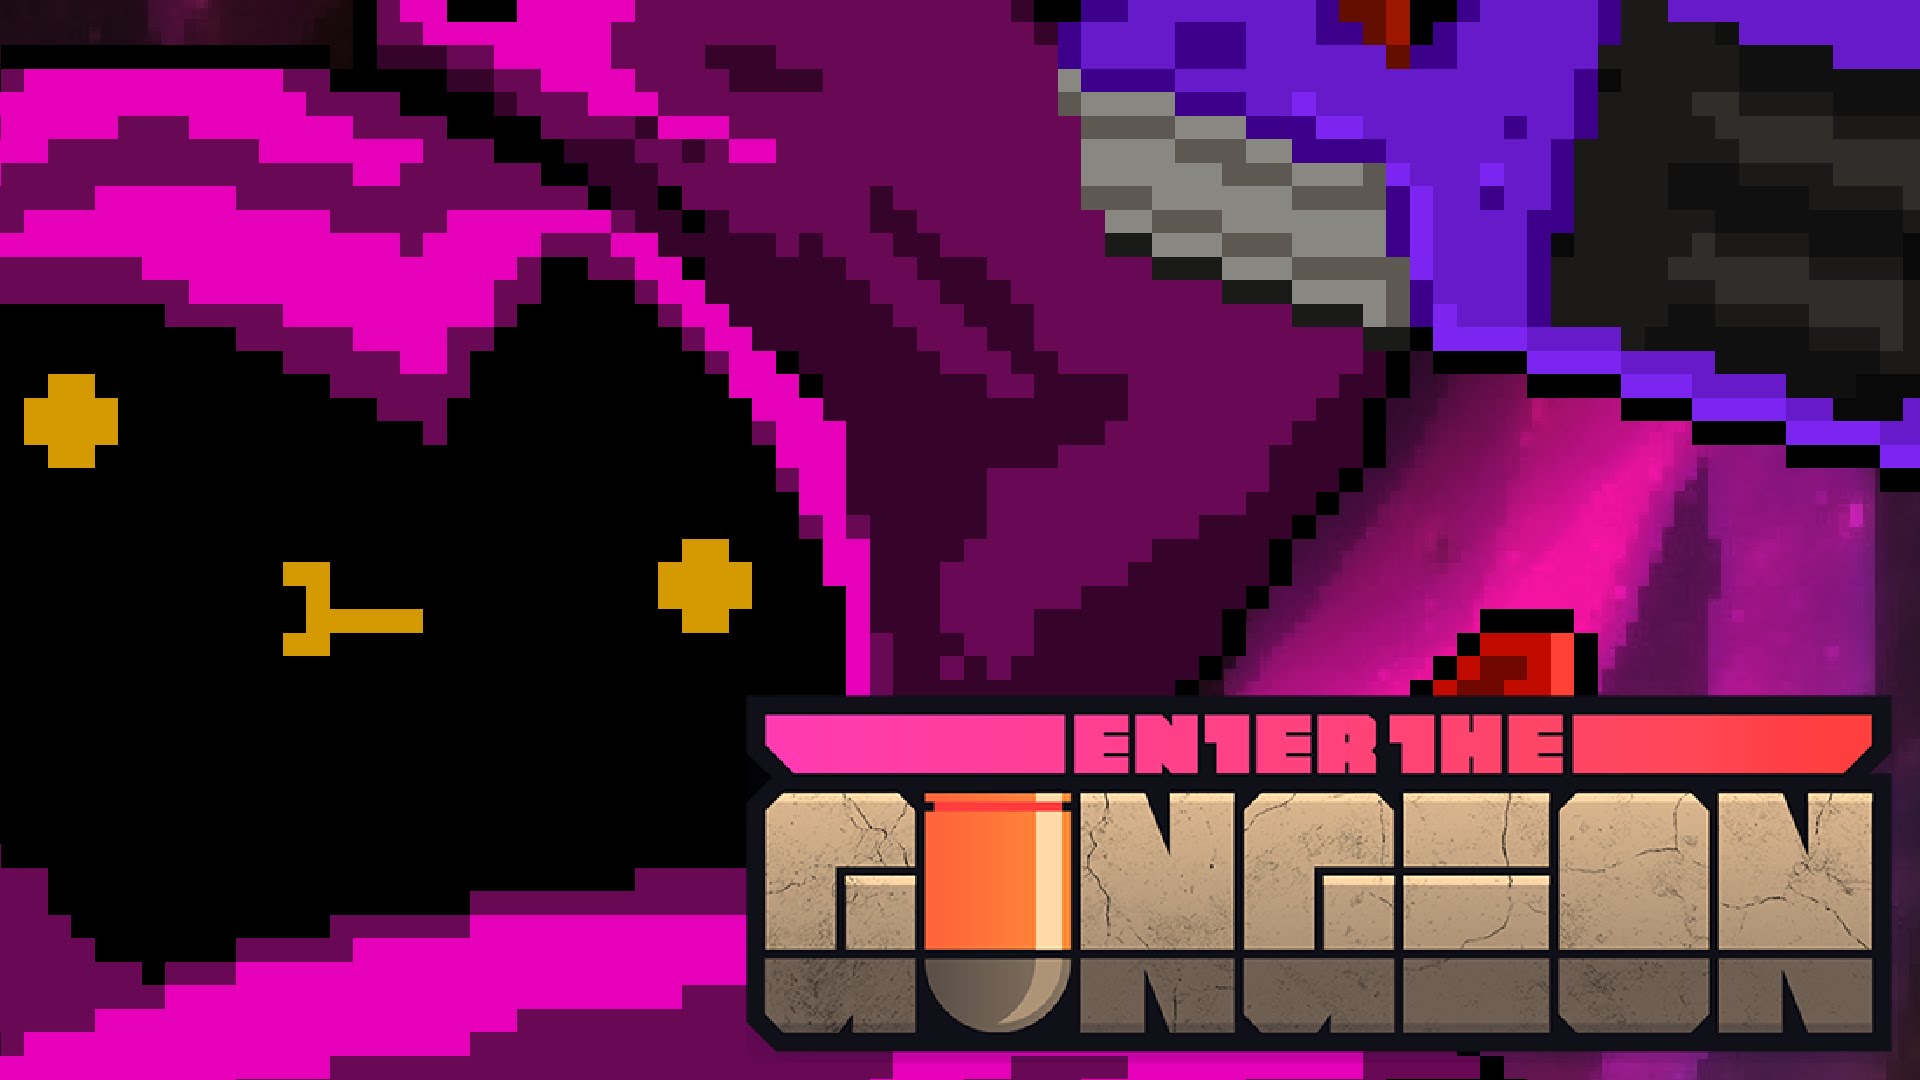 How to play as the Cultist alone for Enter the Gungeon. 